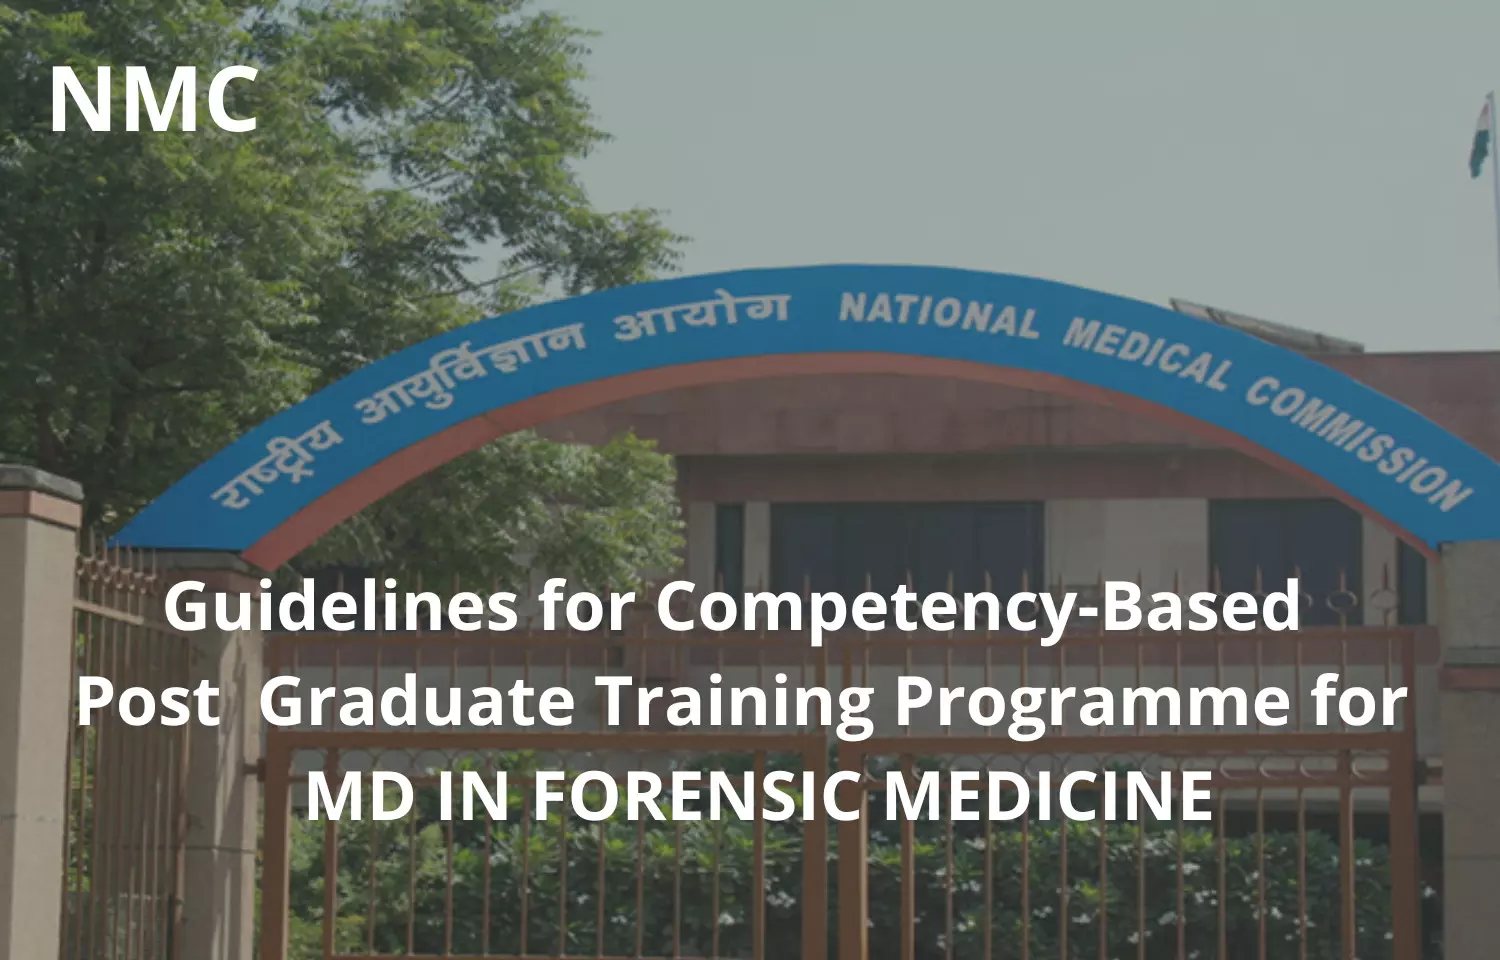 NMC Guidelines for Competency-Based Training Programme For MD Forensic Medicine